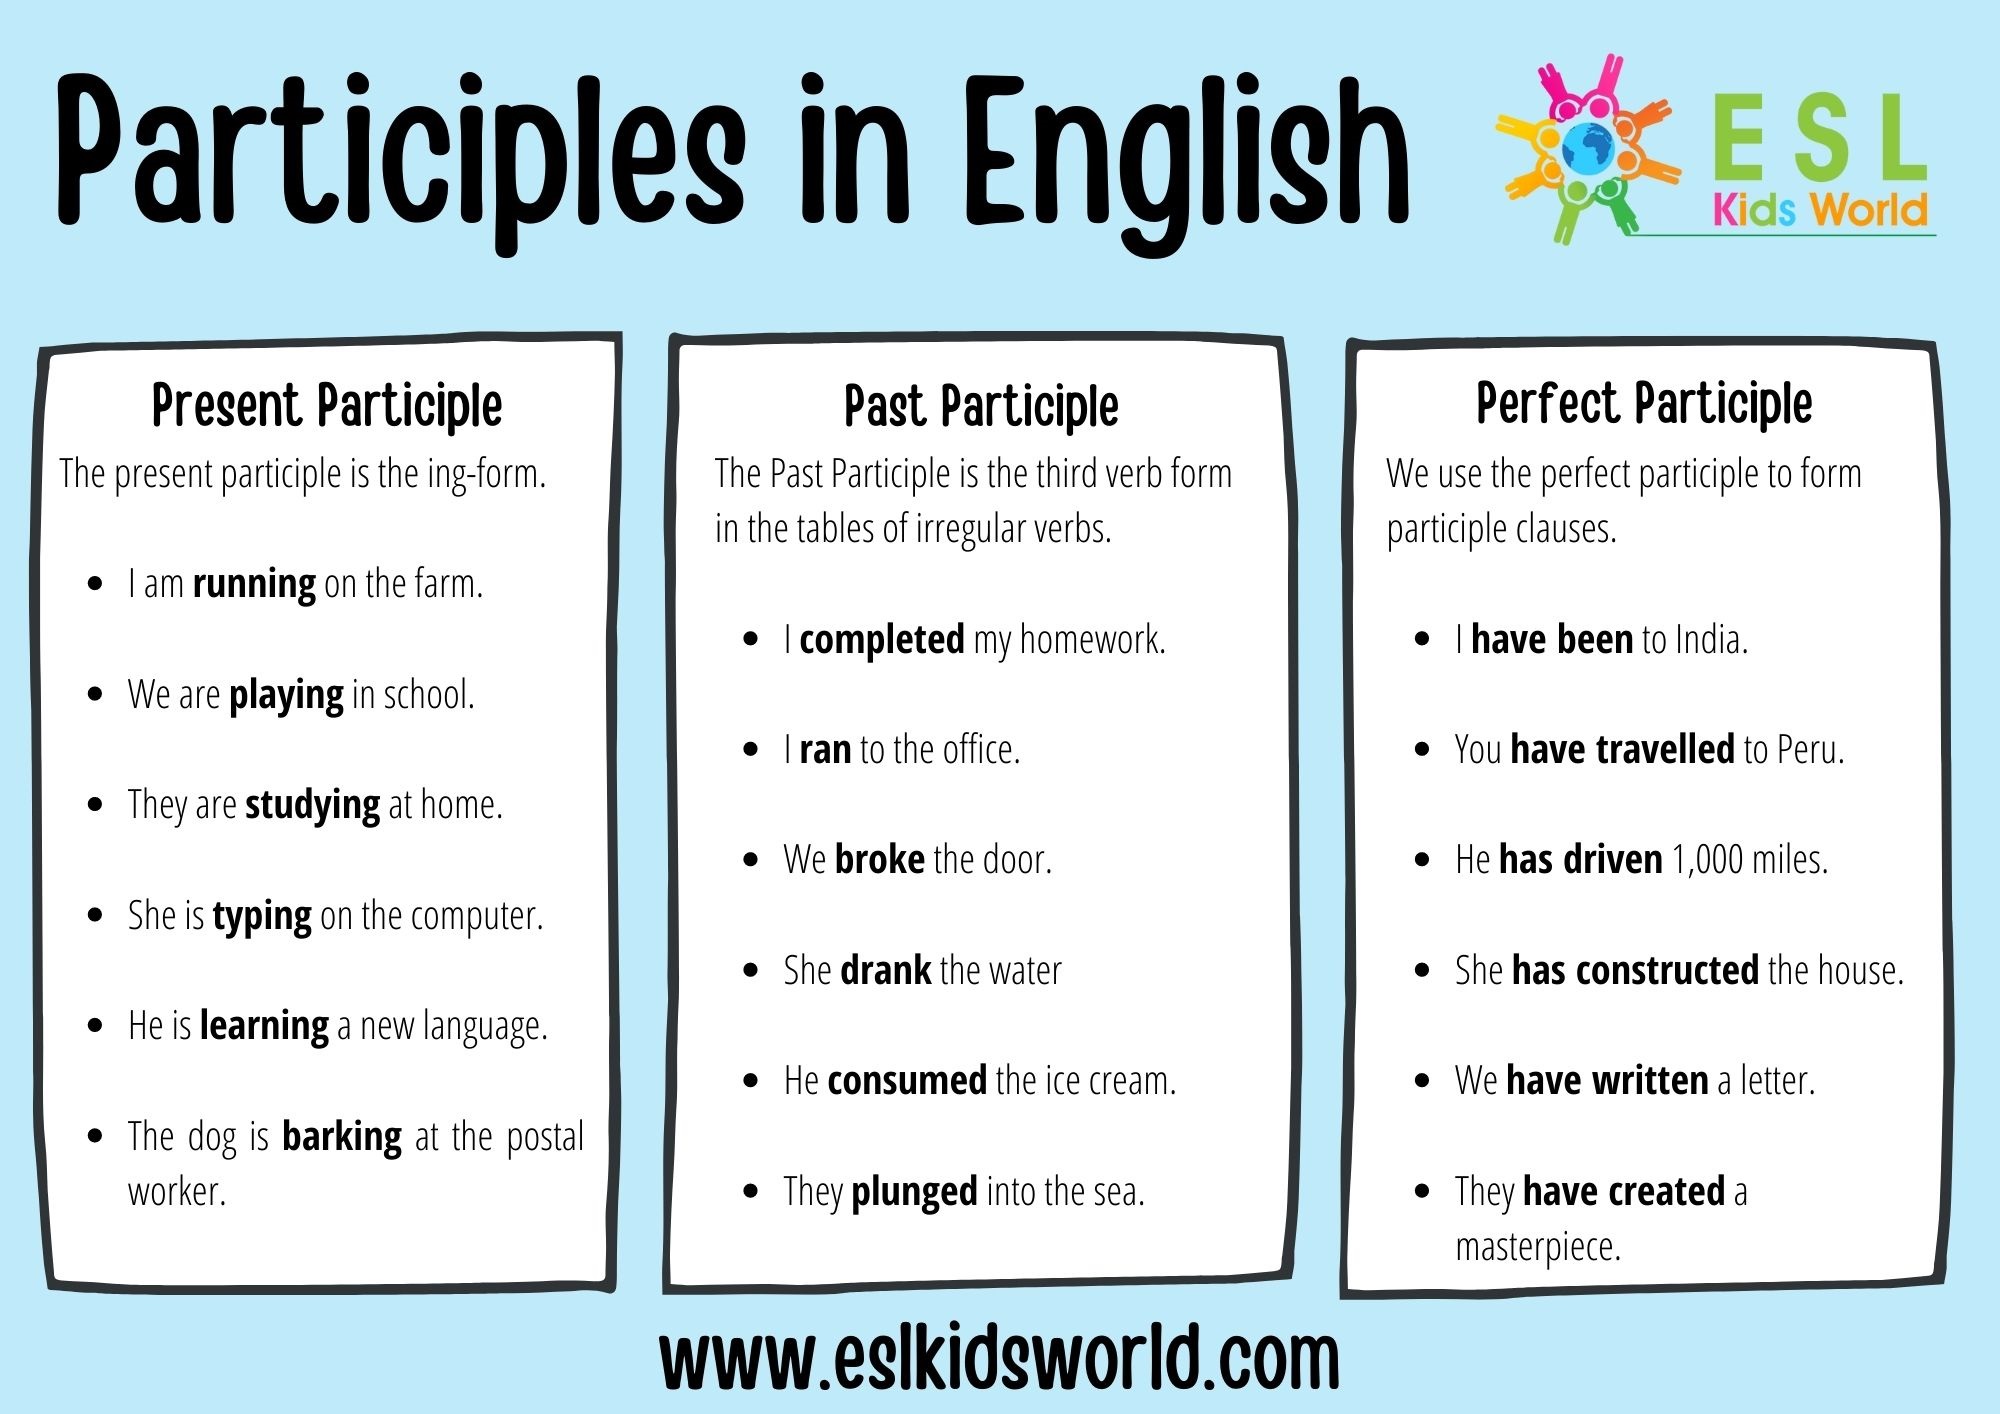 present participle meaning